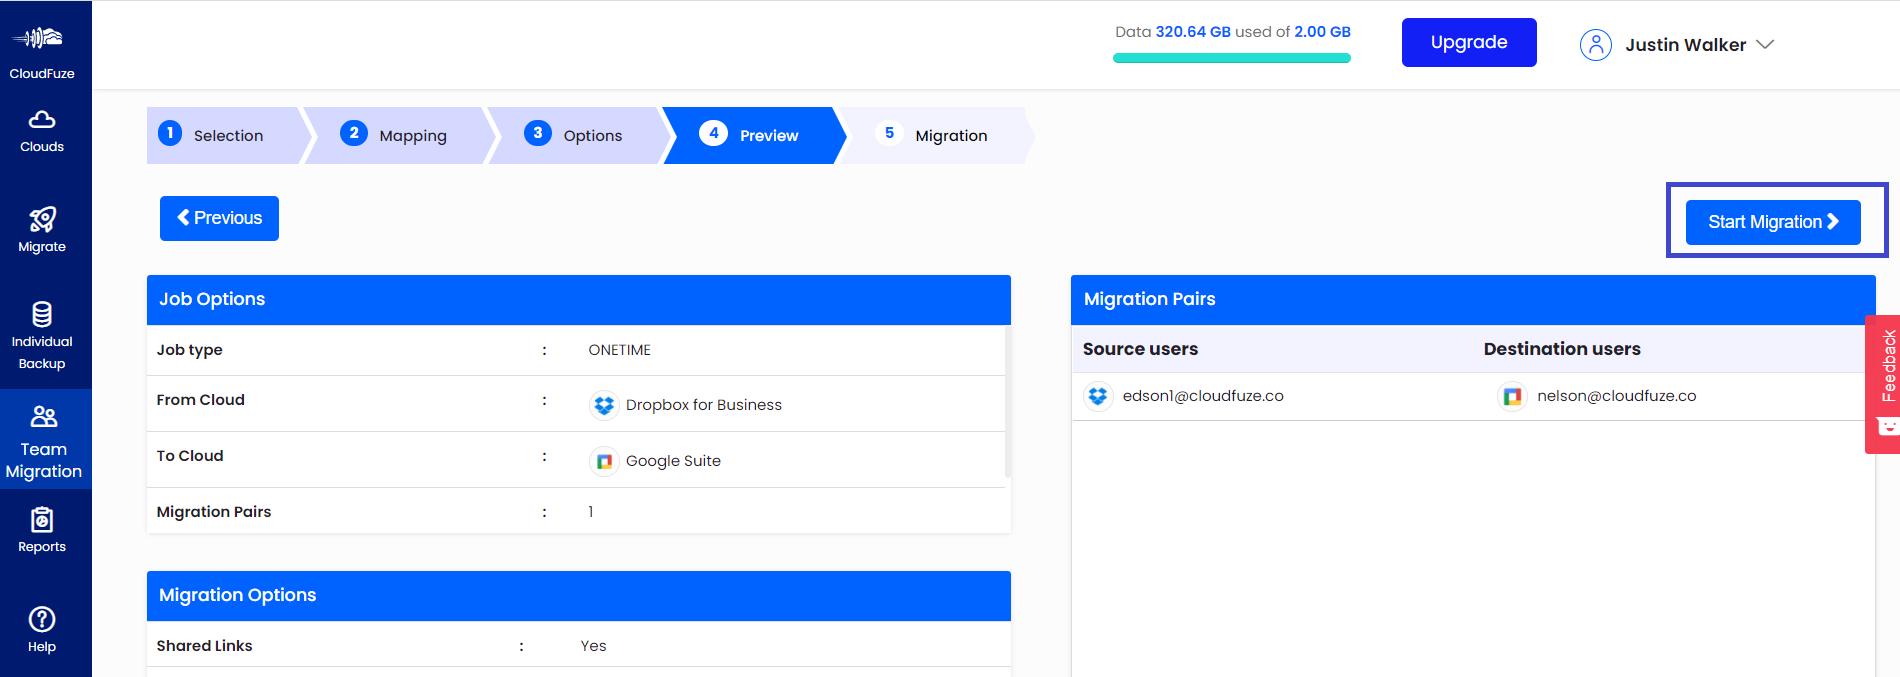 Preview Migration for Dropbox to Google Workspace